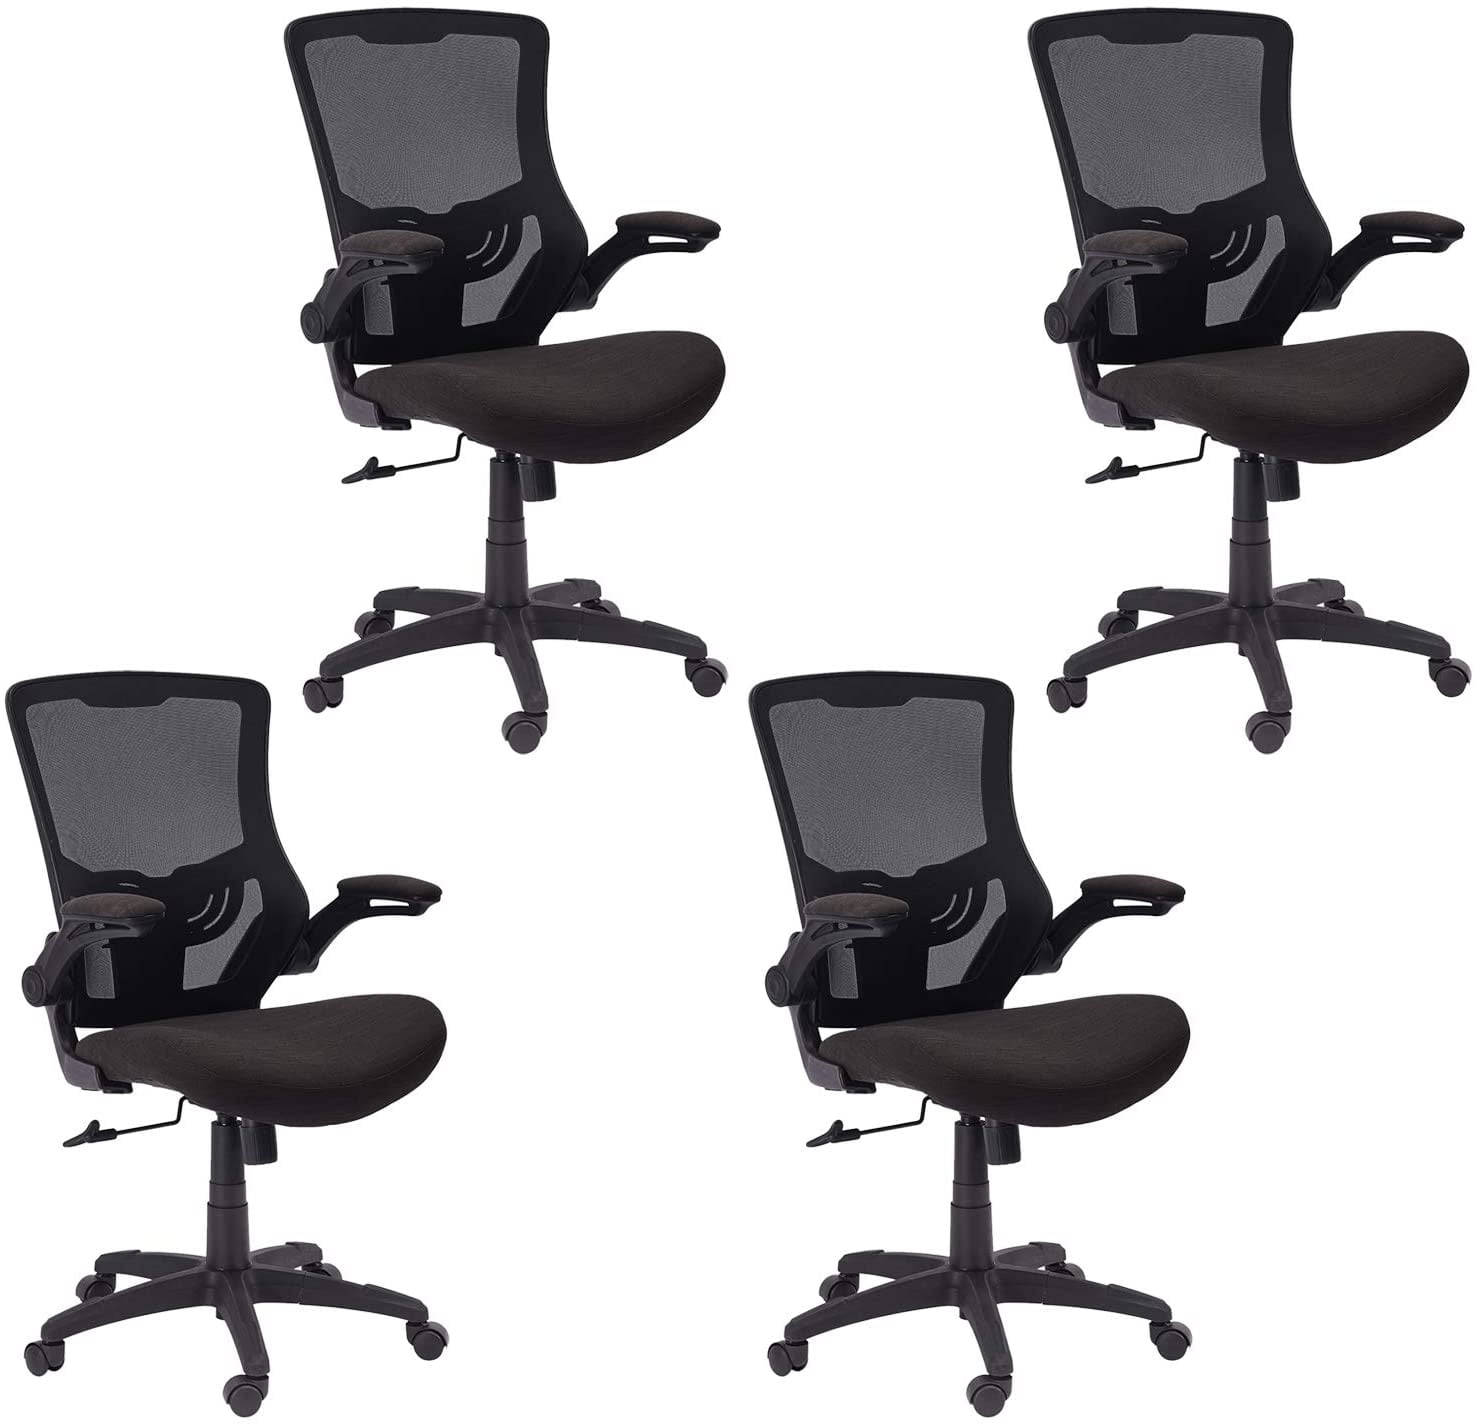 KLASIKA Mesh Ergonomic Desk Chair with Flip-up Arm Rest and Lumbar Support 